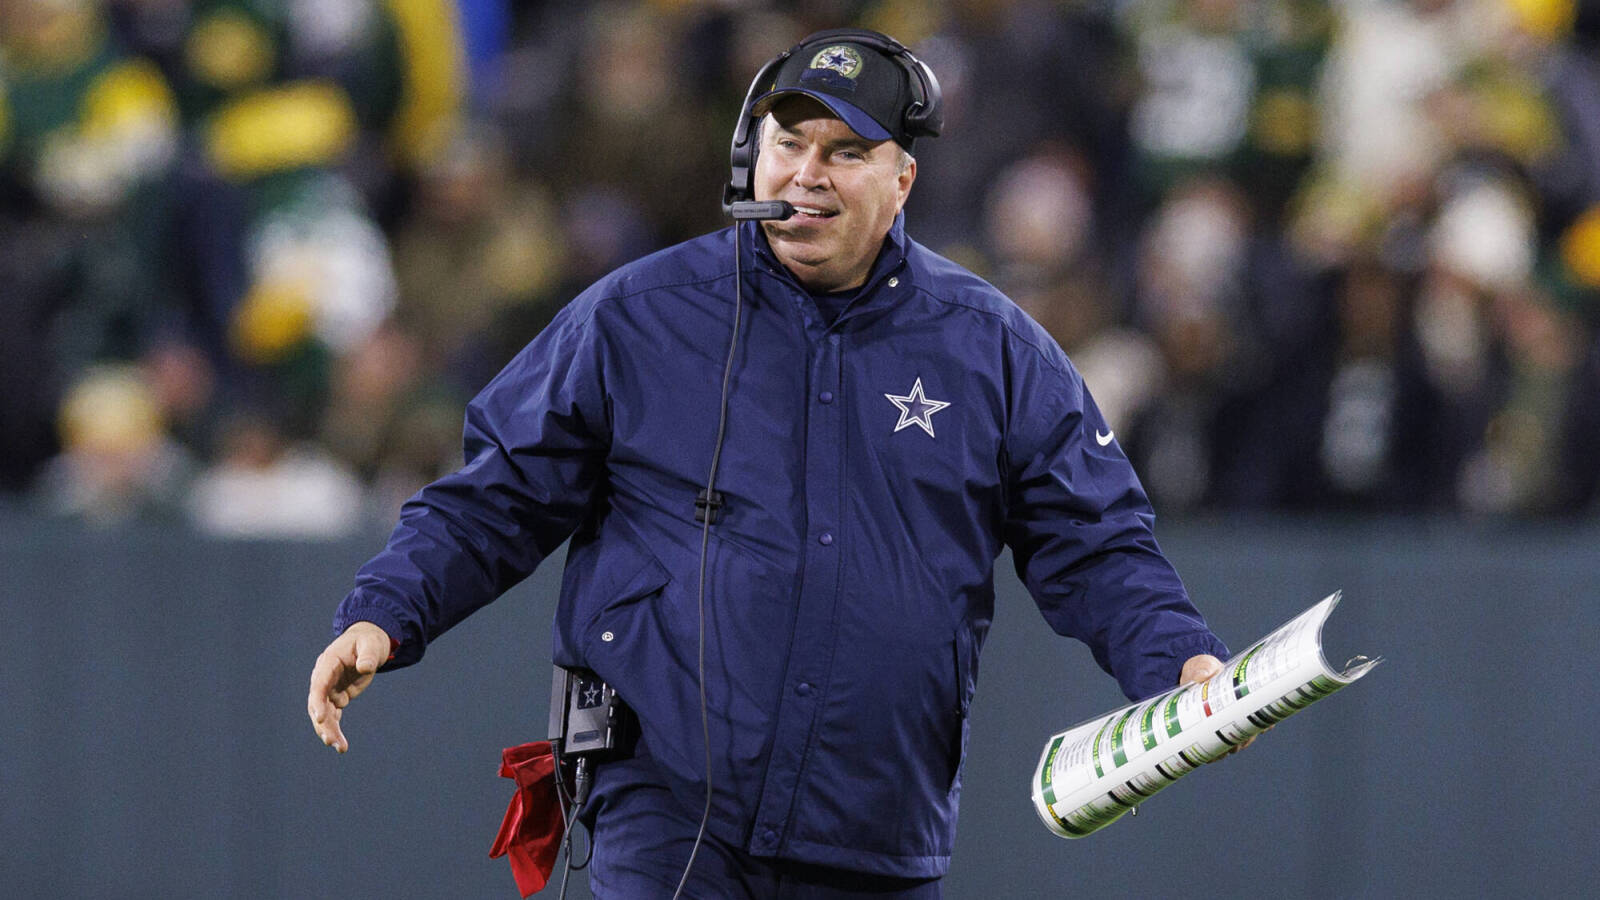 Watch: Mike McCarthy slams headset after turnover on downs